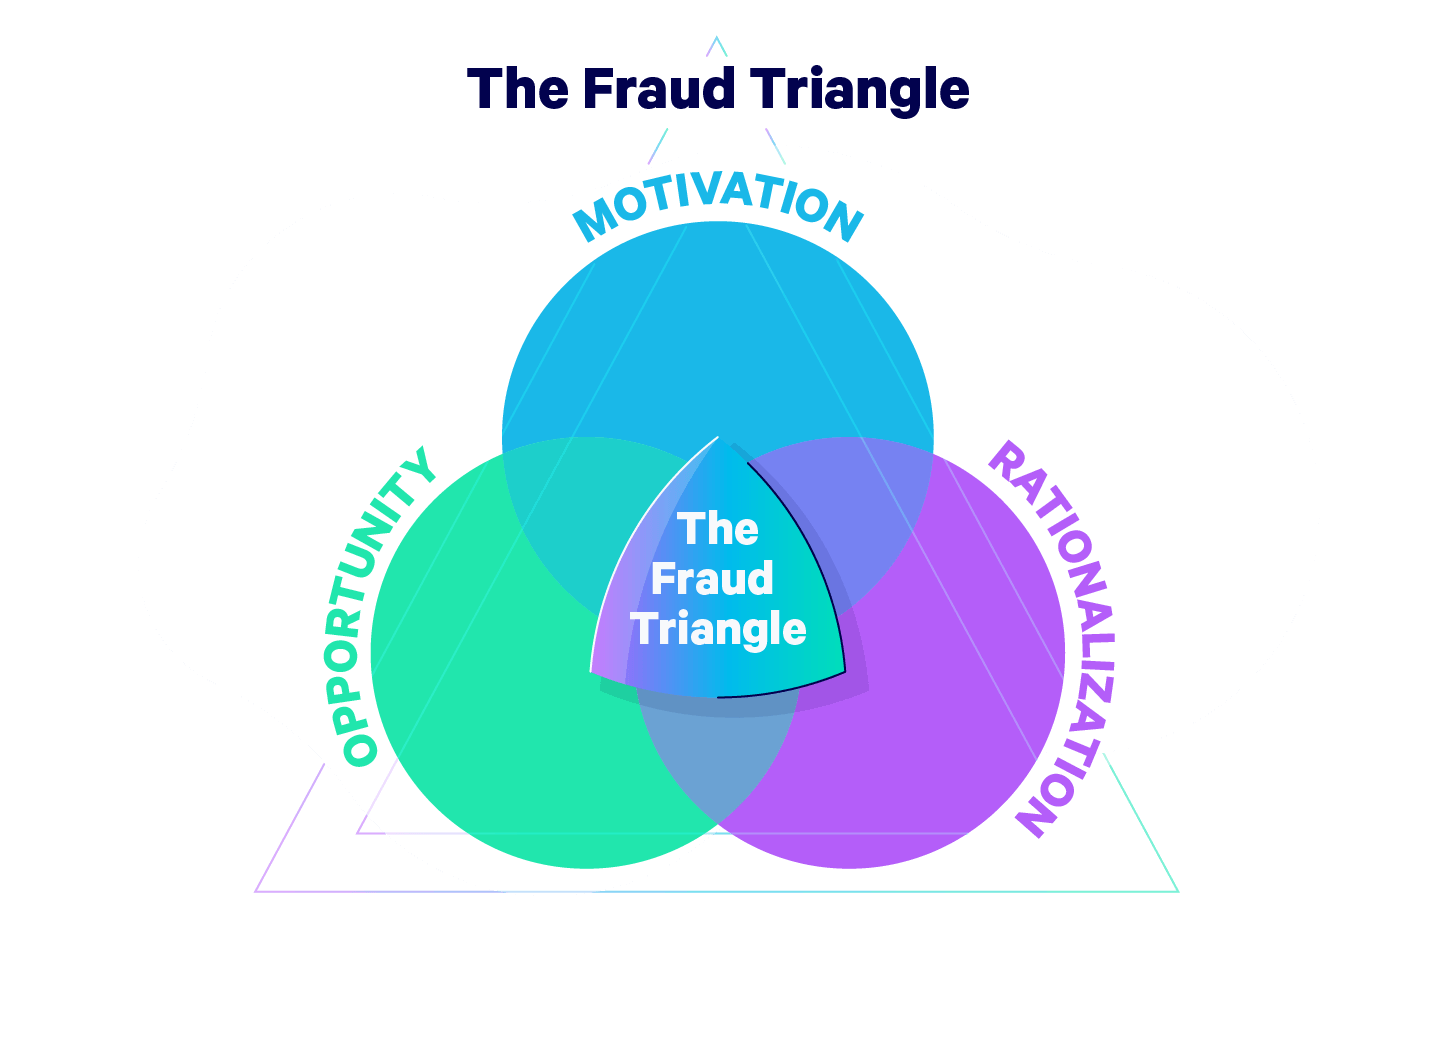 The fraud triangle and its key components motivation, rationalization, and opportunity.